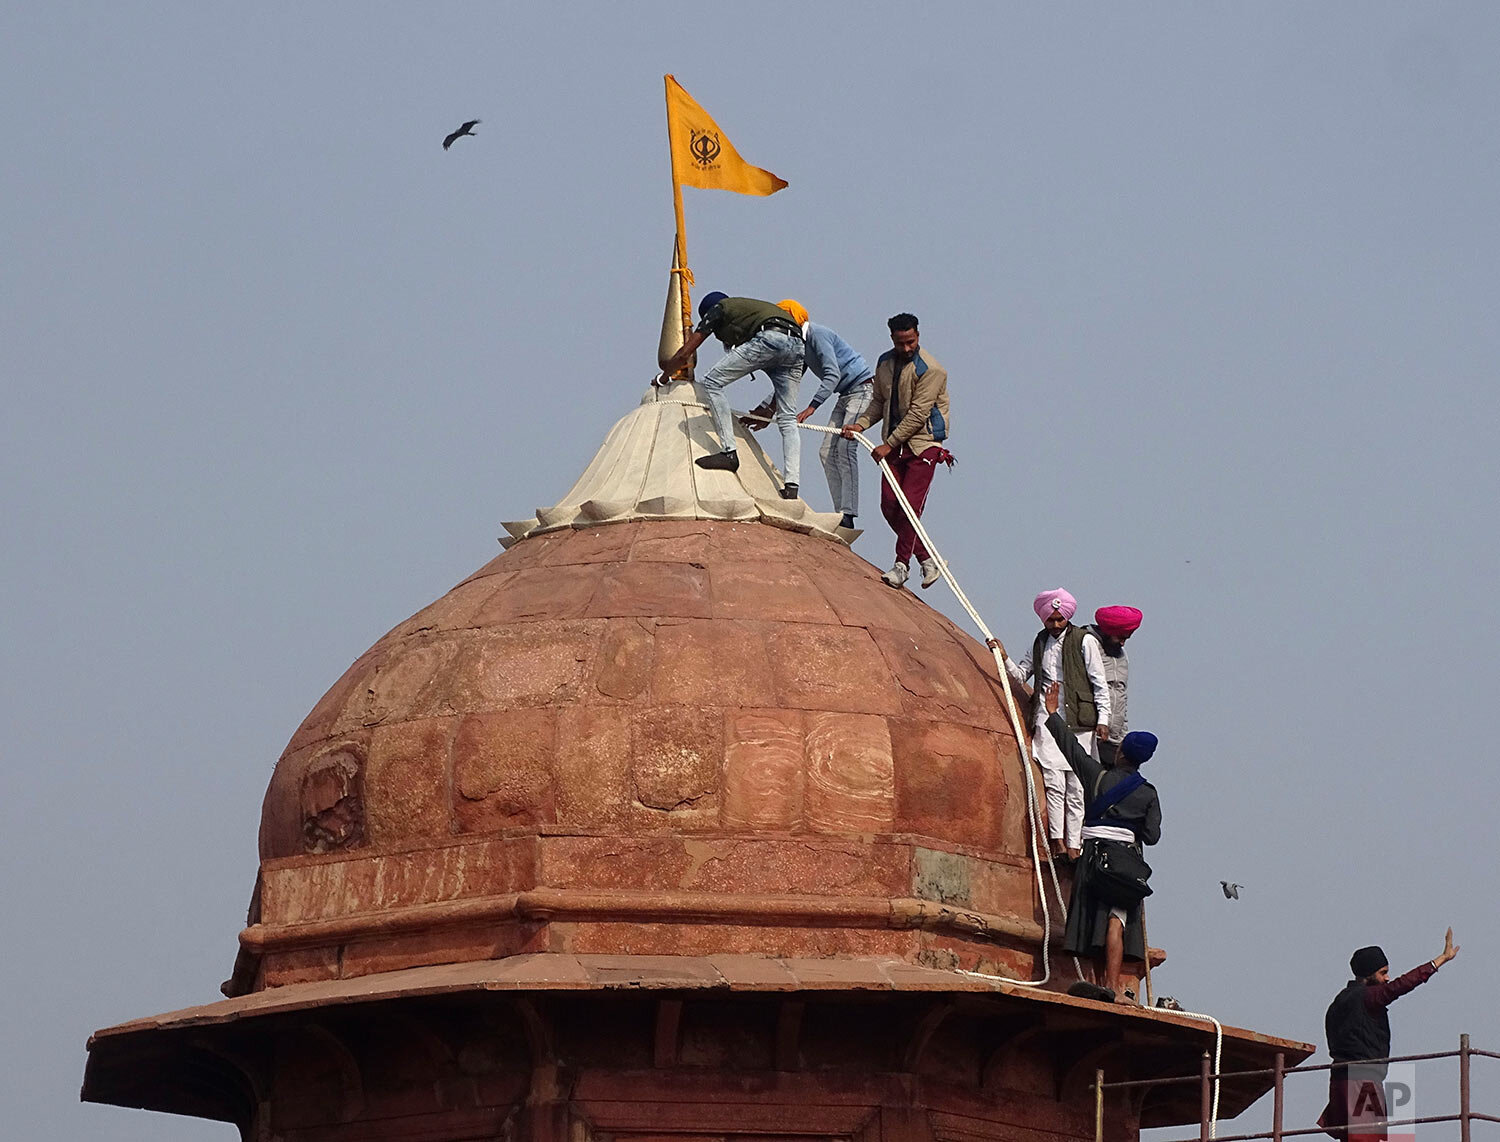  Sikhs hoist a Nishan Sahib, a Sikh religious flag, on a minaret of the historic Red Fort monument in New Delhi, India, Tuesday, Jan. 26, 2021. (AP Photo/Dinesh Joshi) 